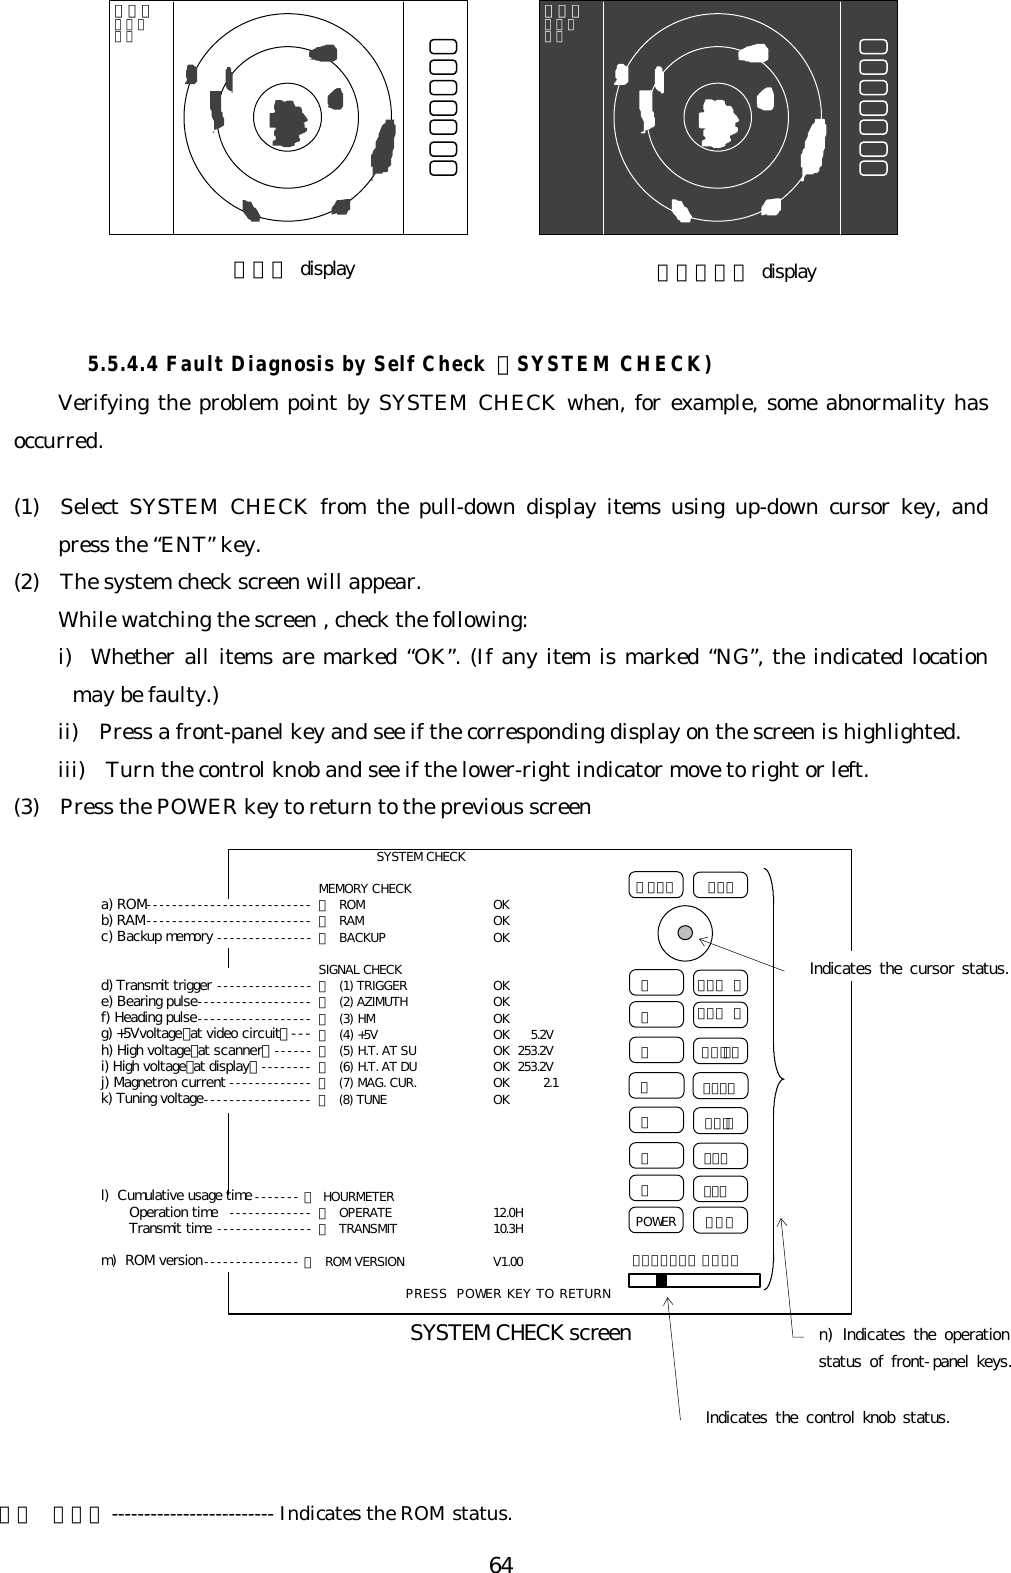 645.5.4.4 Fault Diagnosis by Self Check （SYSTEM CHECK)Verifying the problem point by SYSTEM CHECK when, for example, some abnormality hasoccurred.(1)  Select SYSTEM CHECK from the pull-down display items using up-down cursor key, andpress the “ENT” key.(2)  The system check screen will appear.While watching the screen , check the following:i)  Whether all items are marked “OK”. (If any item is marked “NG”, the indicated locationmay be faulty.)ii)  Press a front-panel key and see if the corresponding display on the screen is highlighted.iii)  Turn the control knob and see if the lower-right indicator move to right or left.(3)  Press the POWER key to return to the previous screenａ） ＲＯＭ------------------------- Indicates the ROM status.ＲＮＧ ＵＲＮＧ ＤＢＲＩＬＬＡＵＴＯ ＧＡＩＮ ＳＴＣ ＦＴＣ １ ２ ３ ４ ５ ６ ７ＭＯＢPOWERn) Indicates the operation status of front-panel keys.SYSTEM CHECK screenＥＮＴＭＥＮＵ Indicates the control knob status. Indicates the cursor status.ＣＯＮＴＲＯＬ ＫＮＯＢSYSTEM CHECKMEMORY CHECKa) ROM-------------------------- ＞ ROM OKb) RAM-------------------------- ＞ RAM OKc) Backup memory --------------- ＞ BACKUP OKSIGNAL CHECKd) Transmit trigger --------------- ＞ (1) TRIGGER OKe) Bearing pulse------------------ ＞ (2) AZIMUTH OKf) Heading pulse------------------ ＞ (3) HM OKg) +5Vvoltage（at video circuit）--- ＞ (4) +5V OK   5.2Vh) High voltage（at scanner）------ ＞ (5) H.T. AT SU OK 253.2Vi) High voltage（at display）-------- ＞ (6) H.T. AT DU OK 253.2Vj) Magnetron current ------------- ＞ (7) MAG. CUR. OK     2.1k) Tuning voltage----------------- ＞ (8) TUNE OKl) Cumulative usage time ------- ＞ HOURMETER   Operation time ------------- ＞ OPERATE 12.0H   Transmit time --------------- ＞ TRANSMIT 10.3Hm) ROM version--------------- ＞ ROM VERSION V1.00PRESS POWER KEY TO RETURNＤＡＹ display ＮＩＧＨＴ display．７５．２５ＨＵ．７５．２５ＨＵ